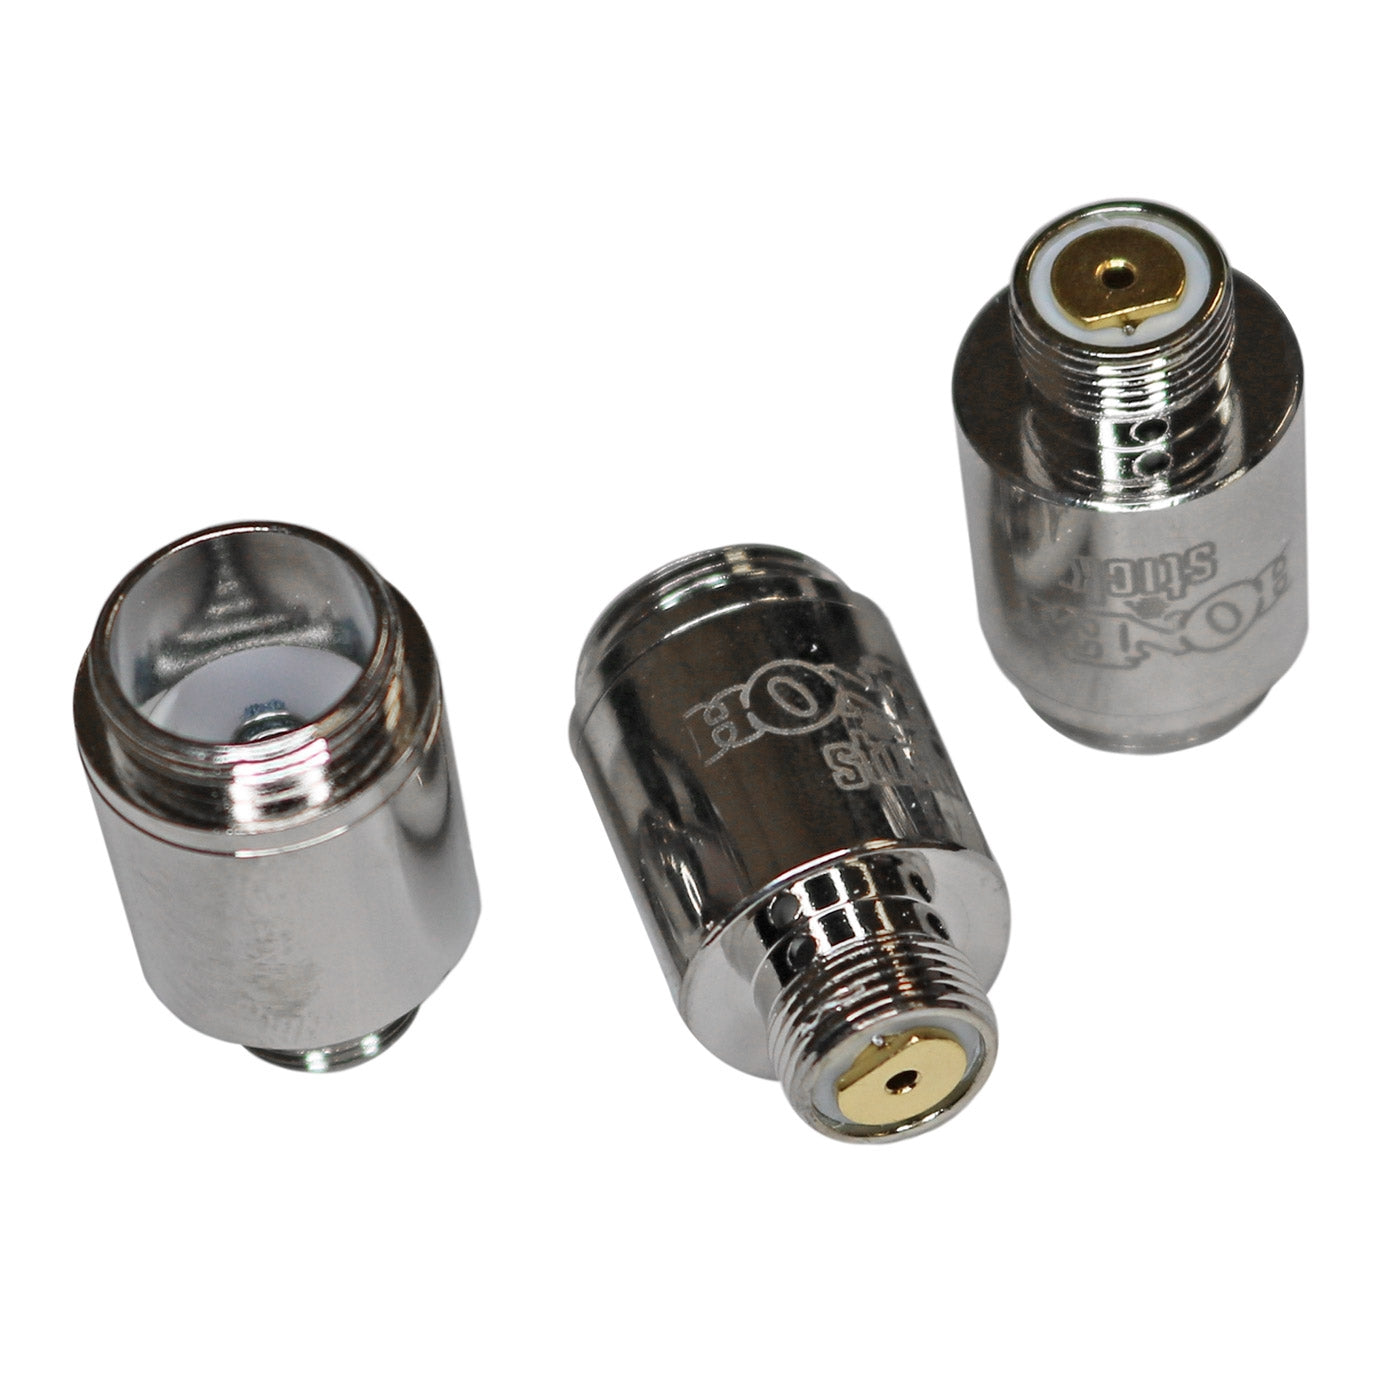 Silencer Cartridge Coils Replacement - 3 pack